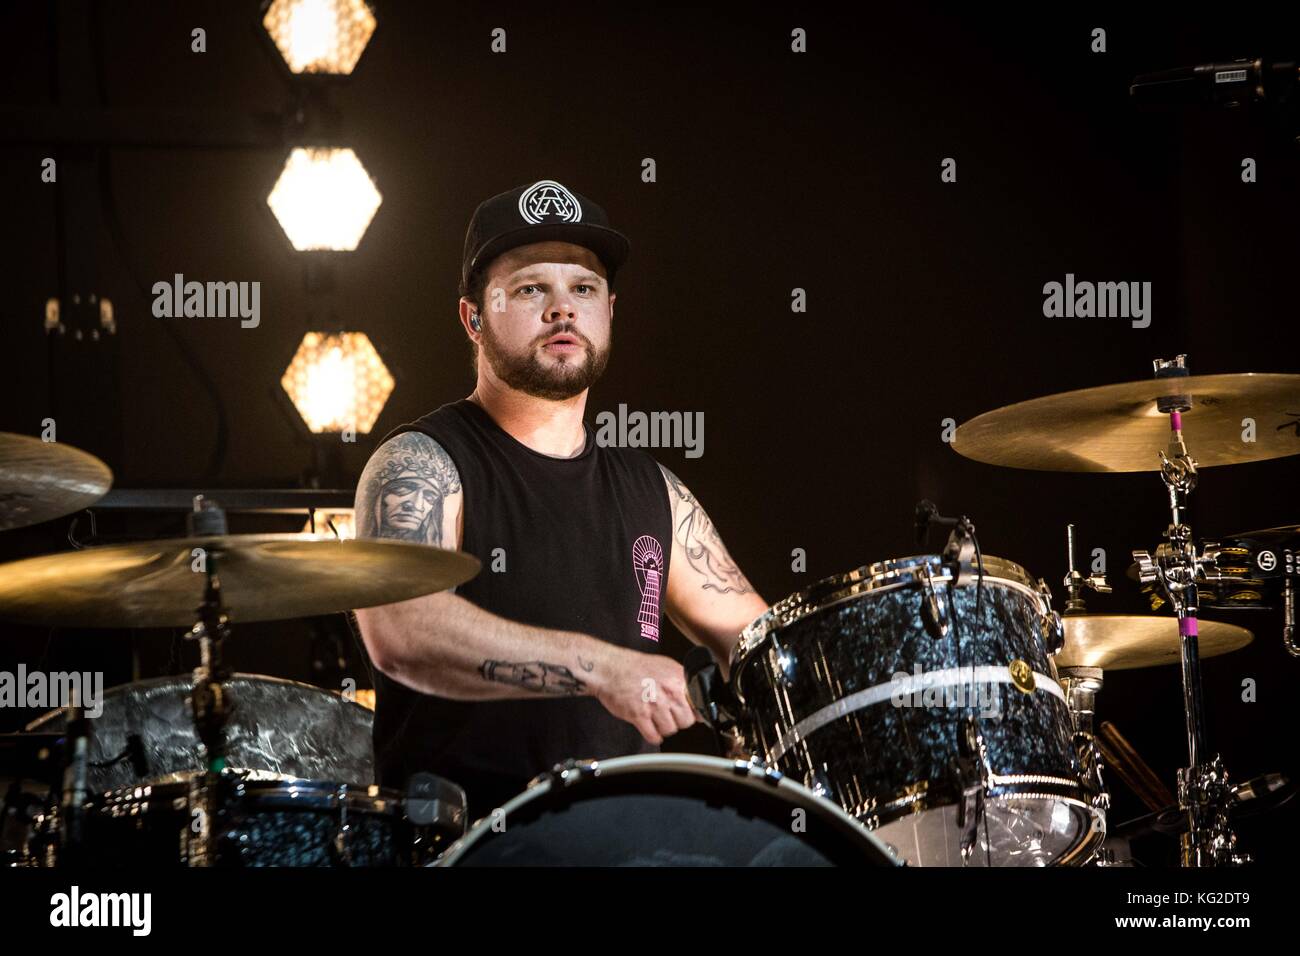 Milan, Italy. 02nd Nov, 2017. Ben Thatcher of the english rock band Royal  Blood pictured on stage as they perform live at Fabrique in Milan Italy.  Credit: Roberto Finizio/Pacific Press/Alamy Live News